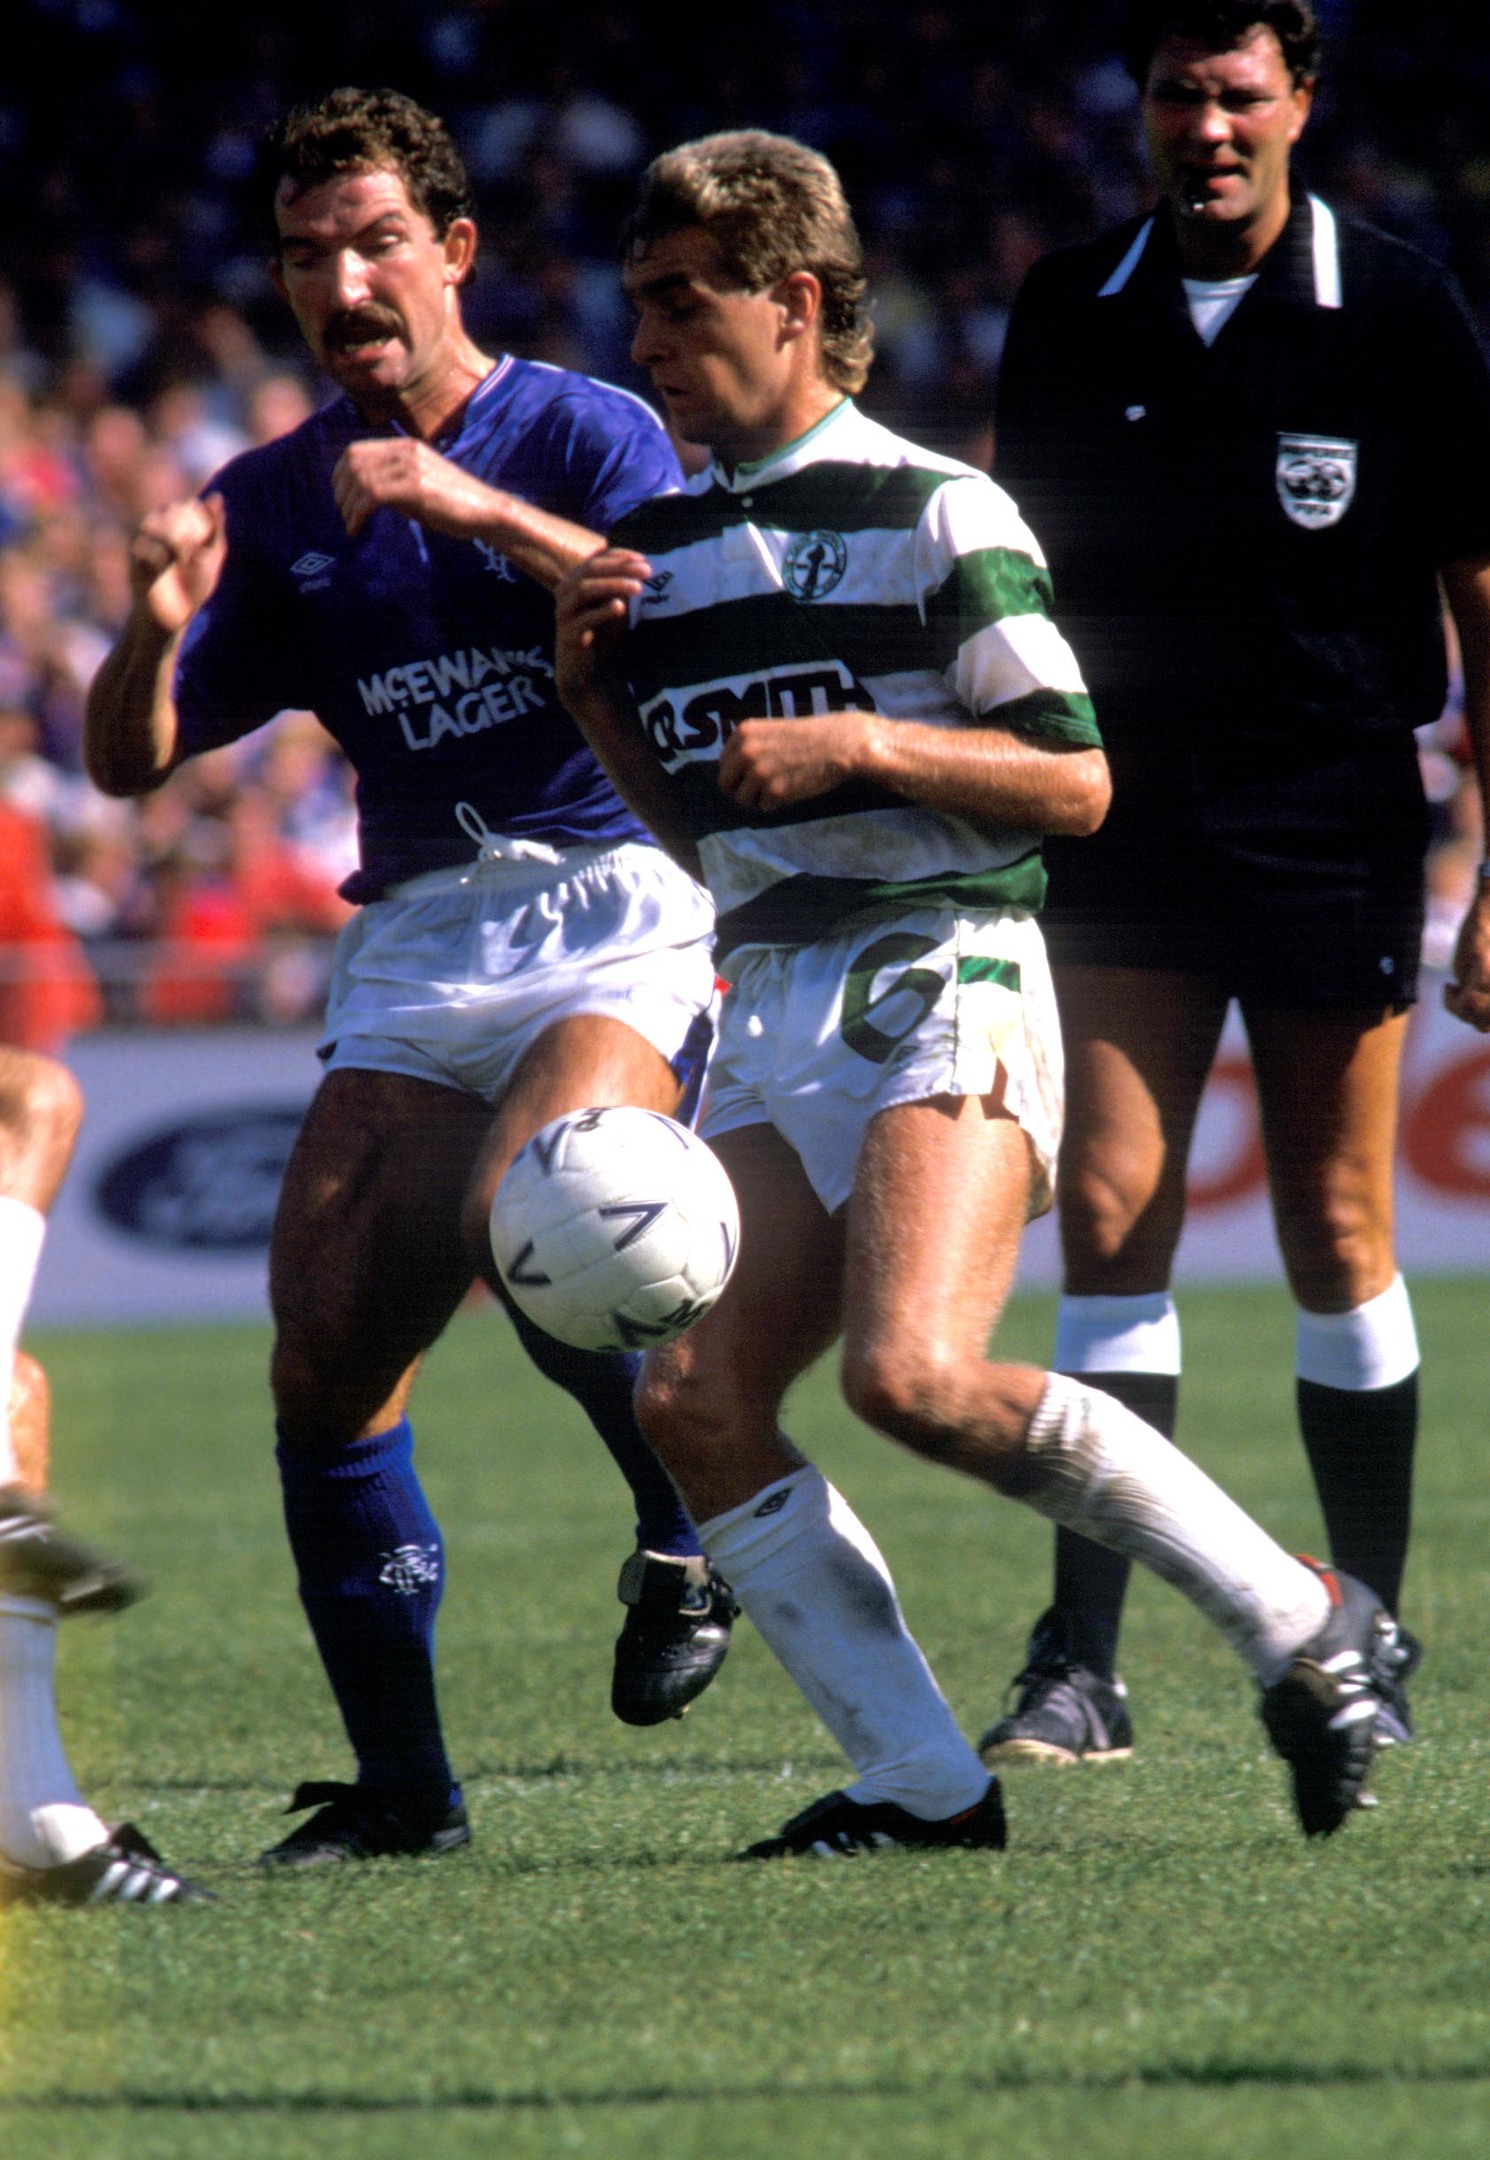 Graeme Souness (left) clashes with Peter Grant closely watched by referee David Syme